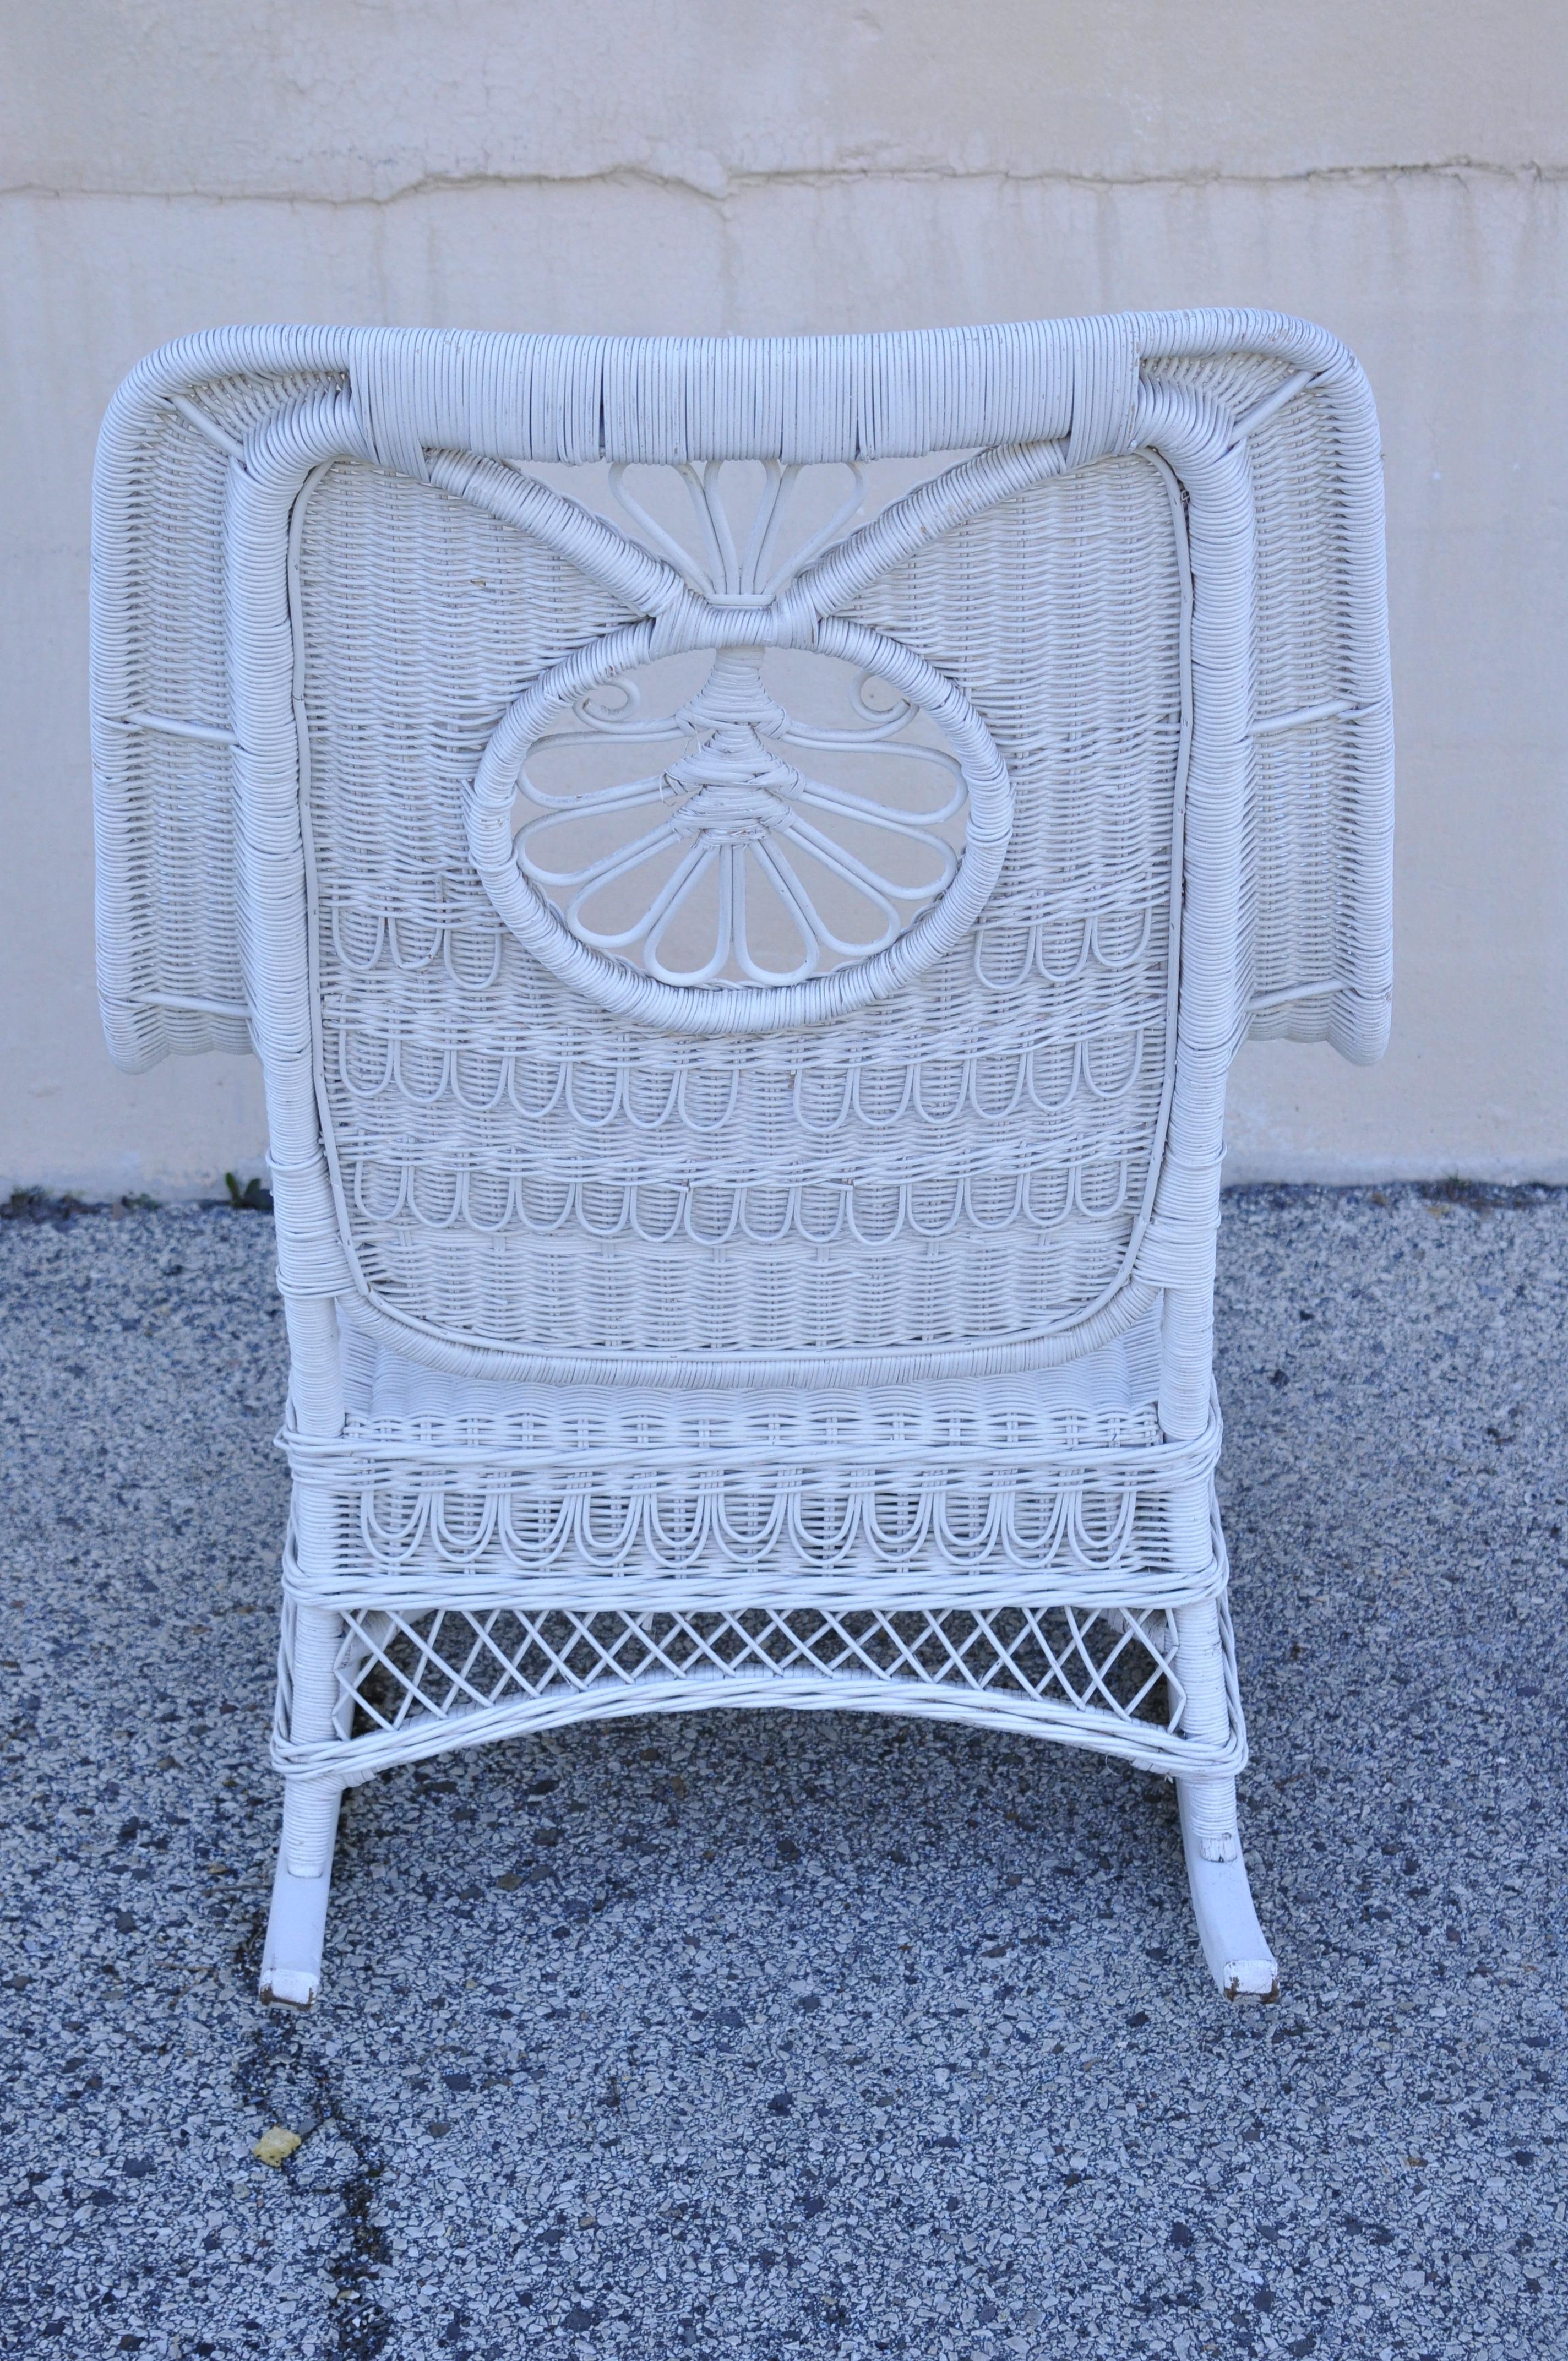 Vintage Oversize White Victorian Style Wicker Rattan Rocking Chair Lounge Chair 5